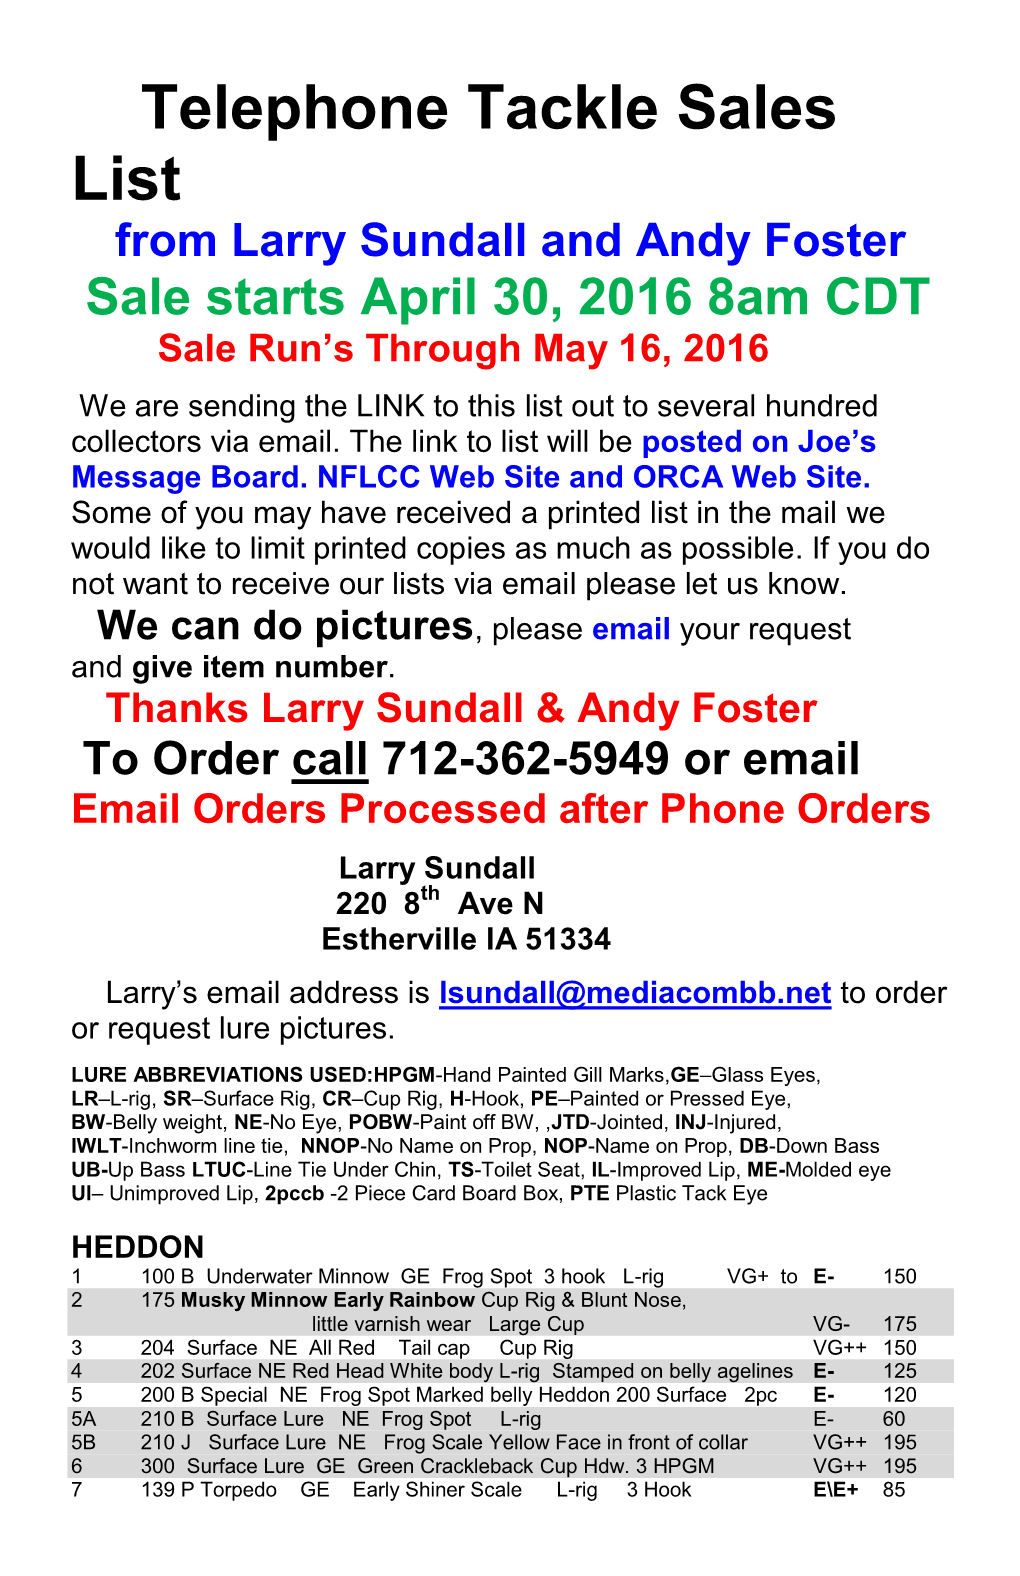 Telephone Tackle Sales List from Larry Sundall and Andy Foster Sale Starts April 30, 2016 8Am CDT Sale Run’S Through May 16, 2016